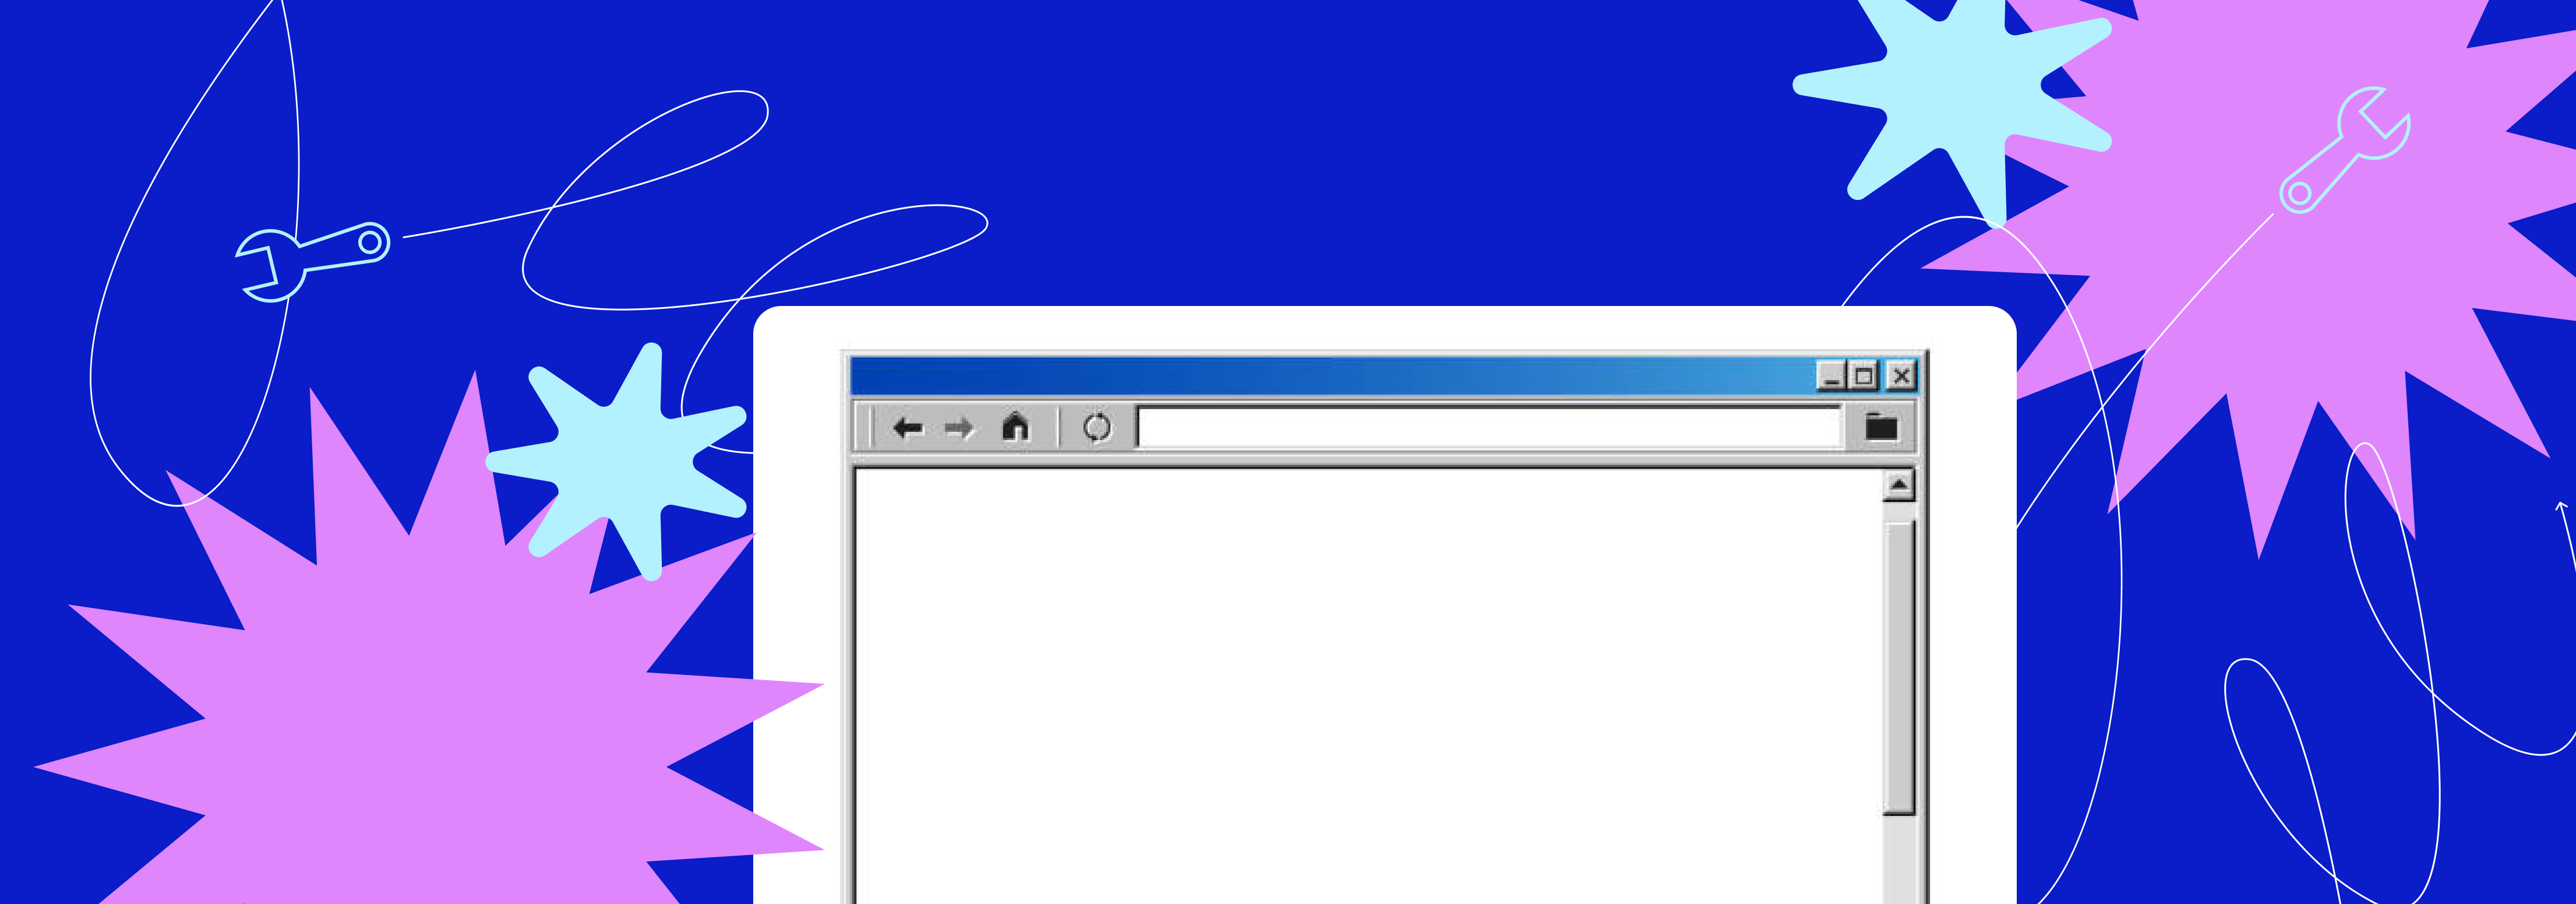 Old website image, with shapes in light blue and pink surrounding it